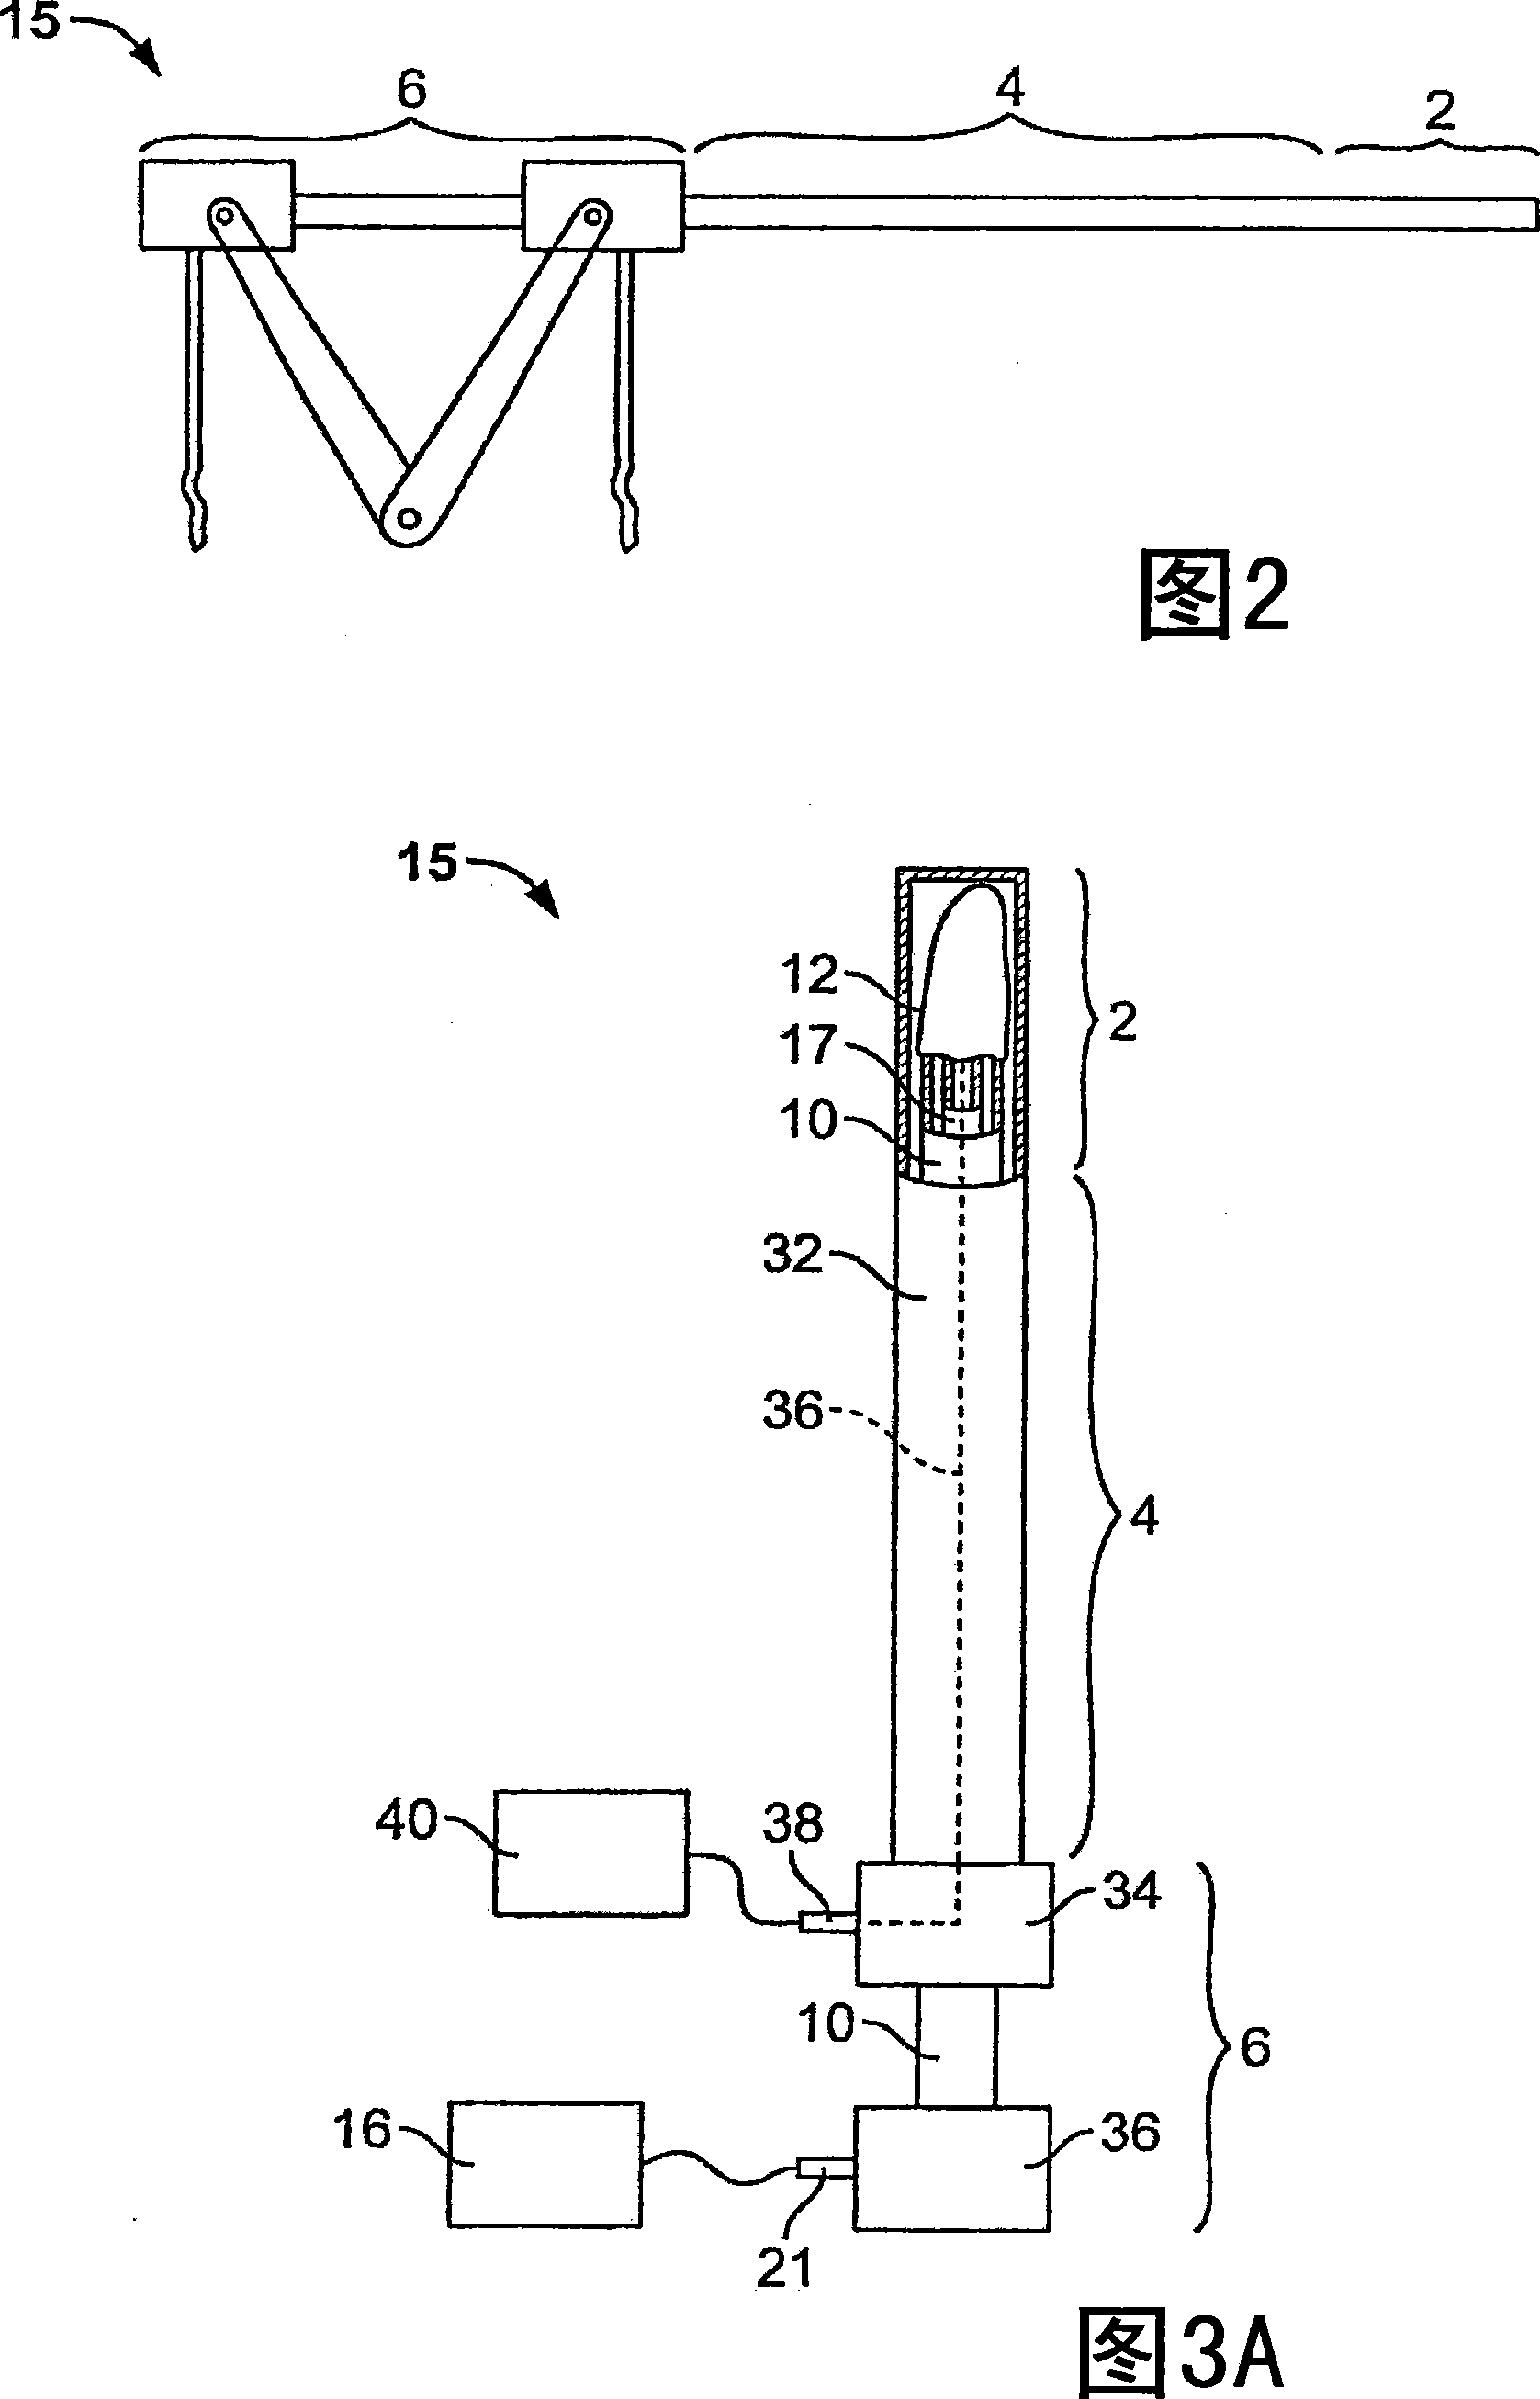 Method and system for transcervical tubal occlusion